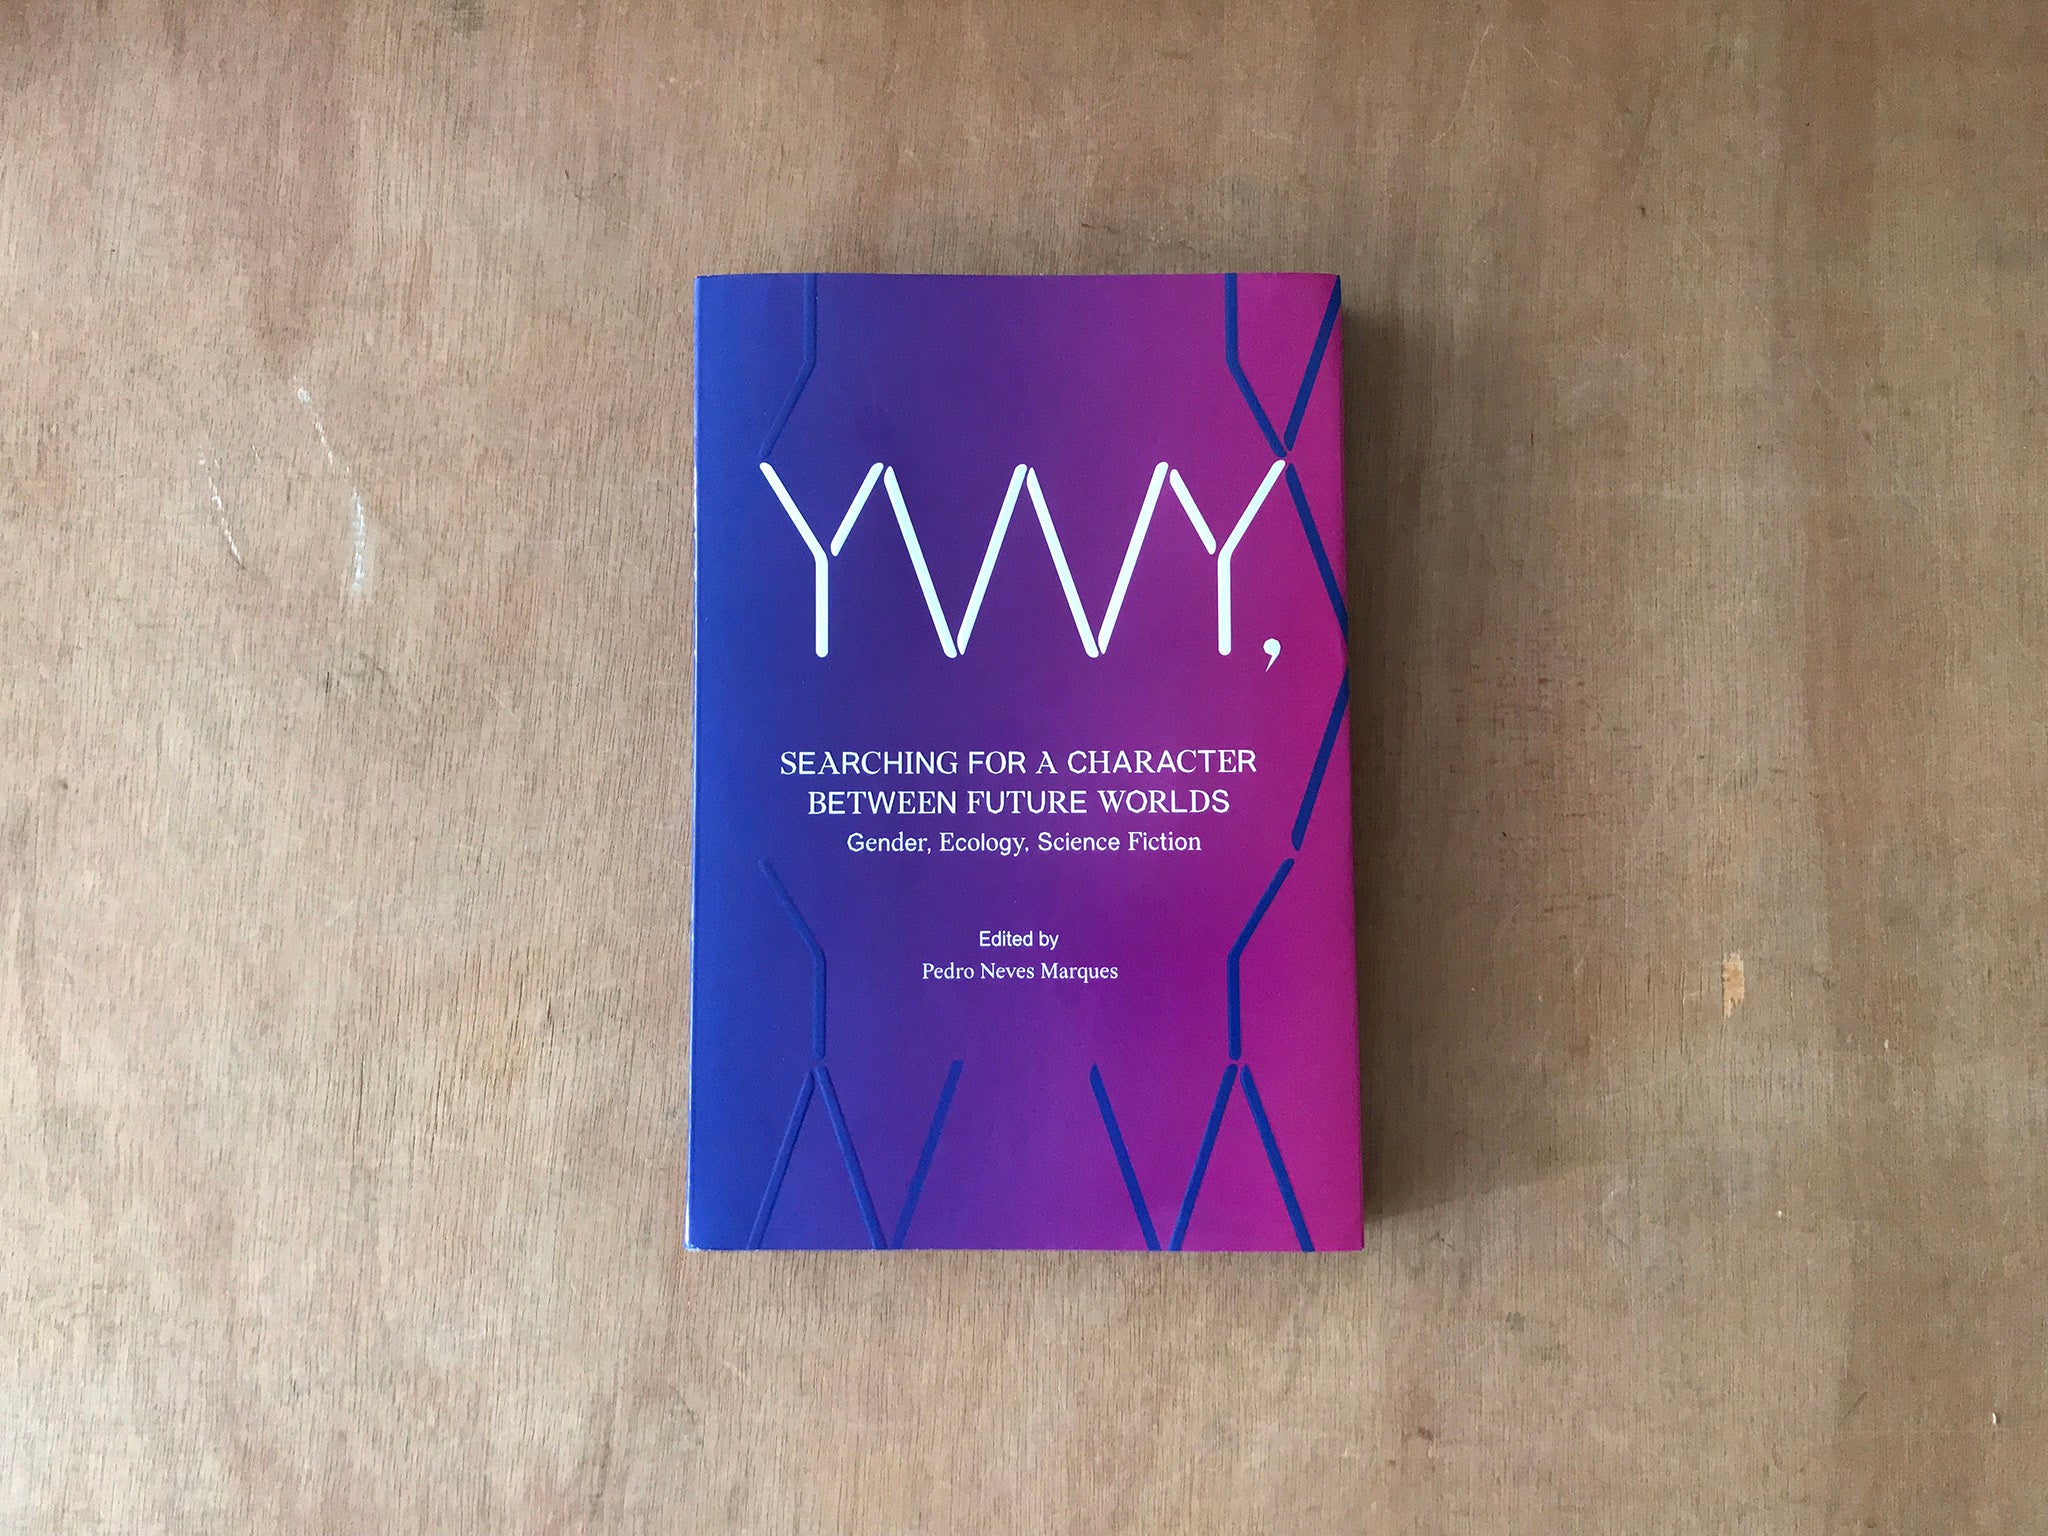 YWY, SEARCHING FOR A CHARACTER BETWEEN FUTURE WORLDS: GENDER, ECOLOGY, SCIENCE FICTION Edited by Pedro Neves Marques